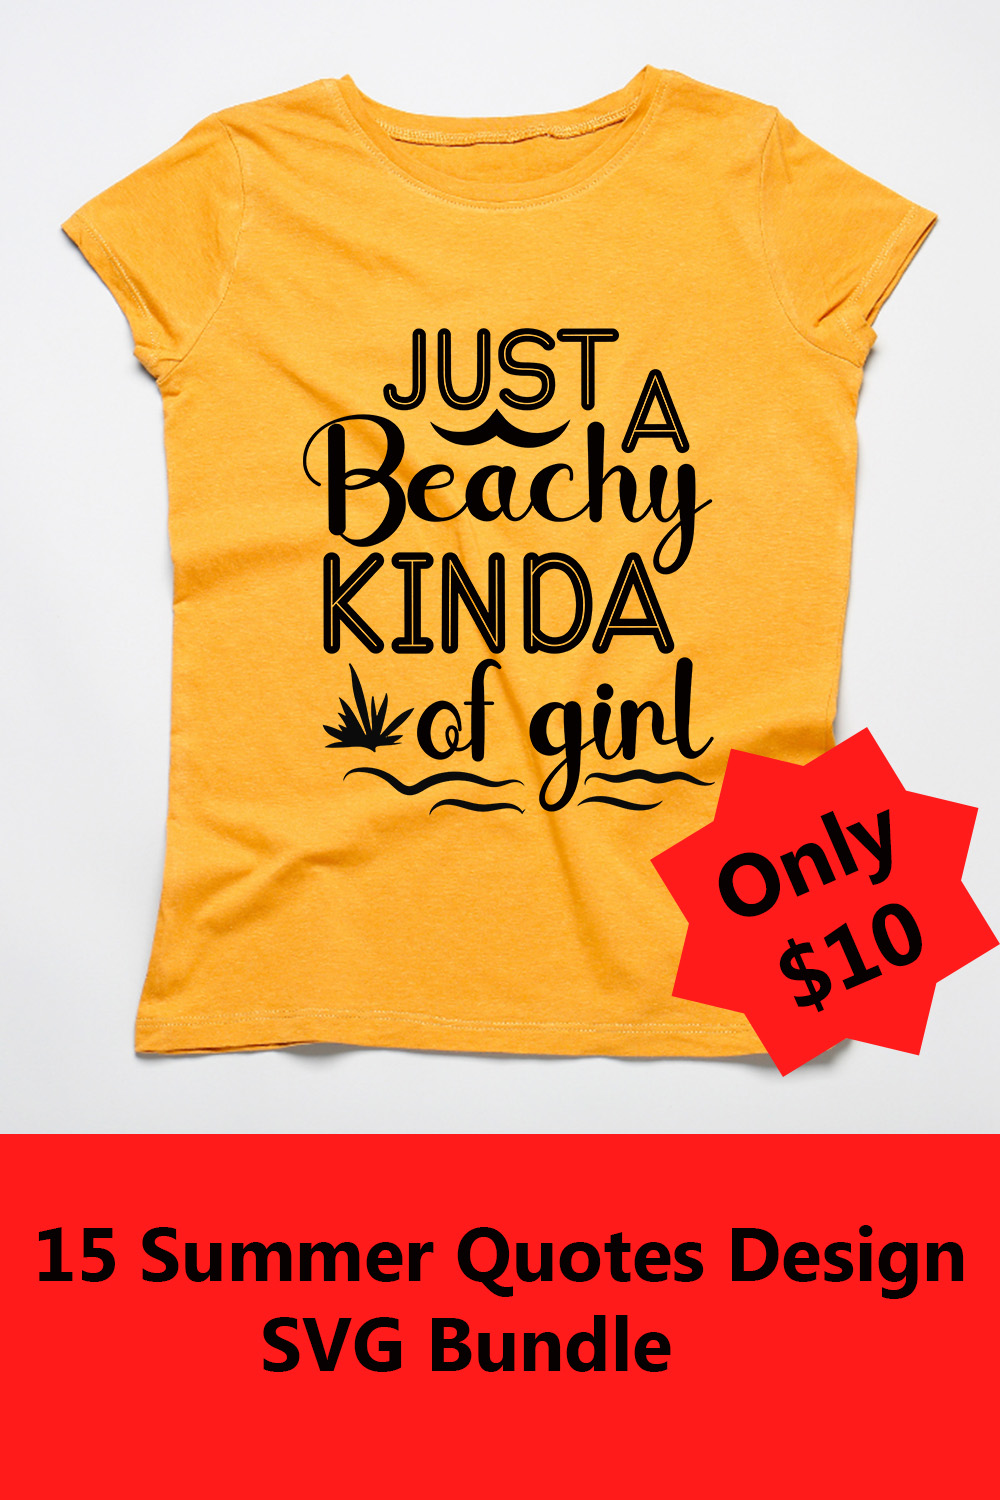 Image of a white t-shirt with an irresistible inscription Just a beachy kinda of girl